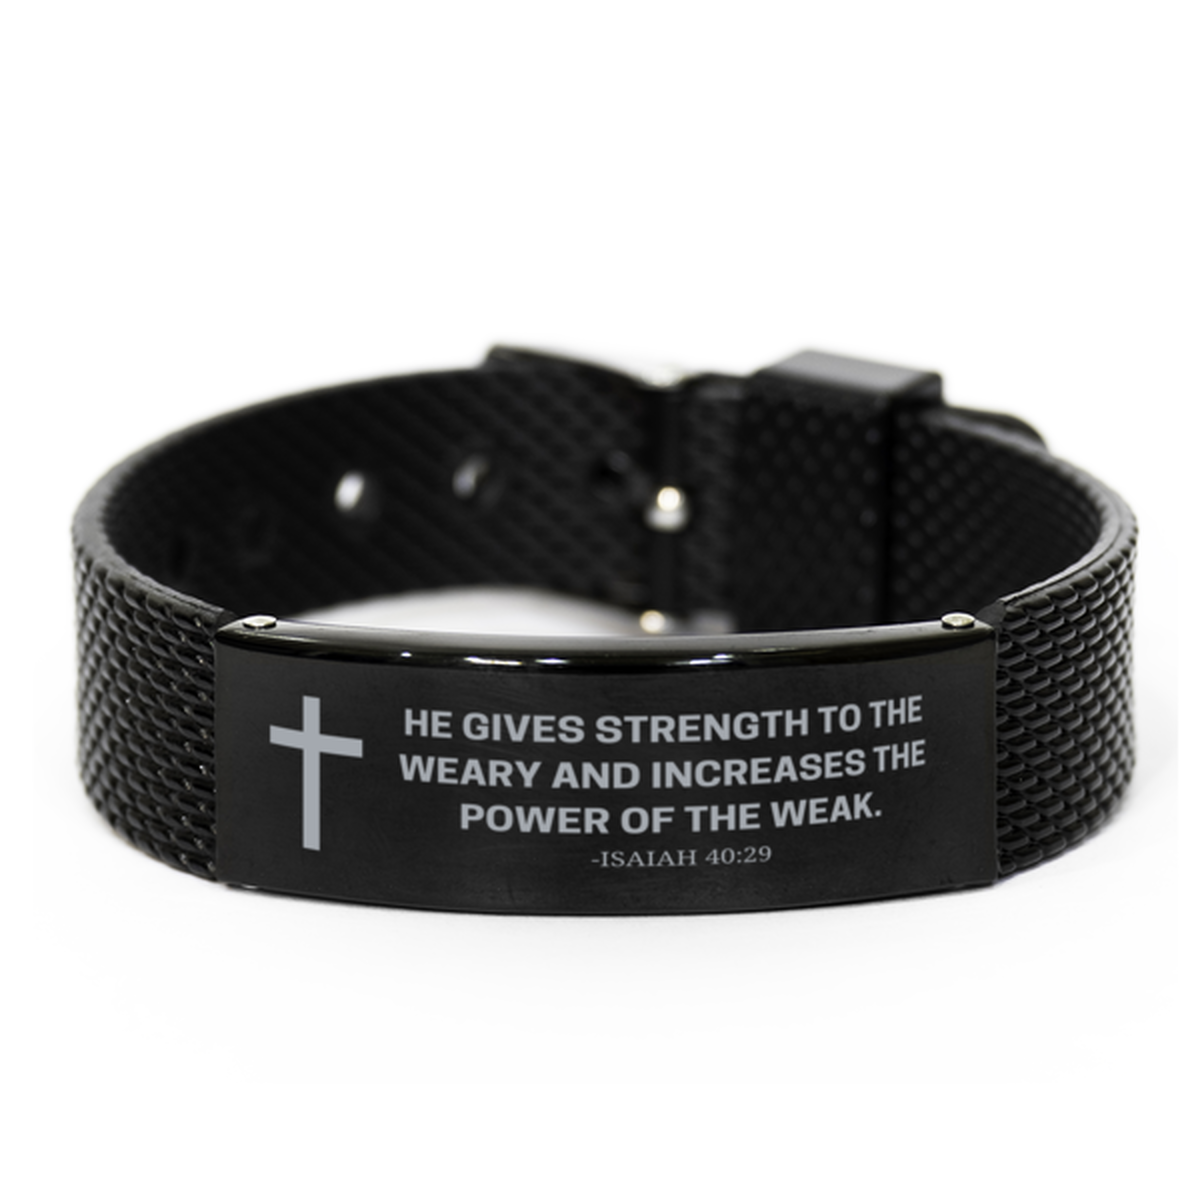 Baptism Gifts For Teenage Boys Girls, Christian Bible Verse Black Shark Mesh Bracelet, He gives strength to the weary, Catholic Confirmation Gifts for Son, Godson, Grandson, Nephew